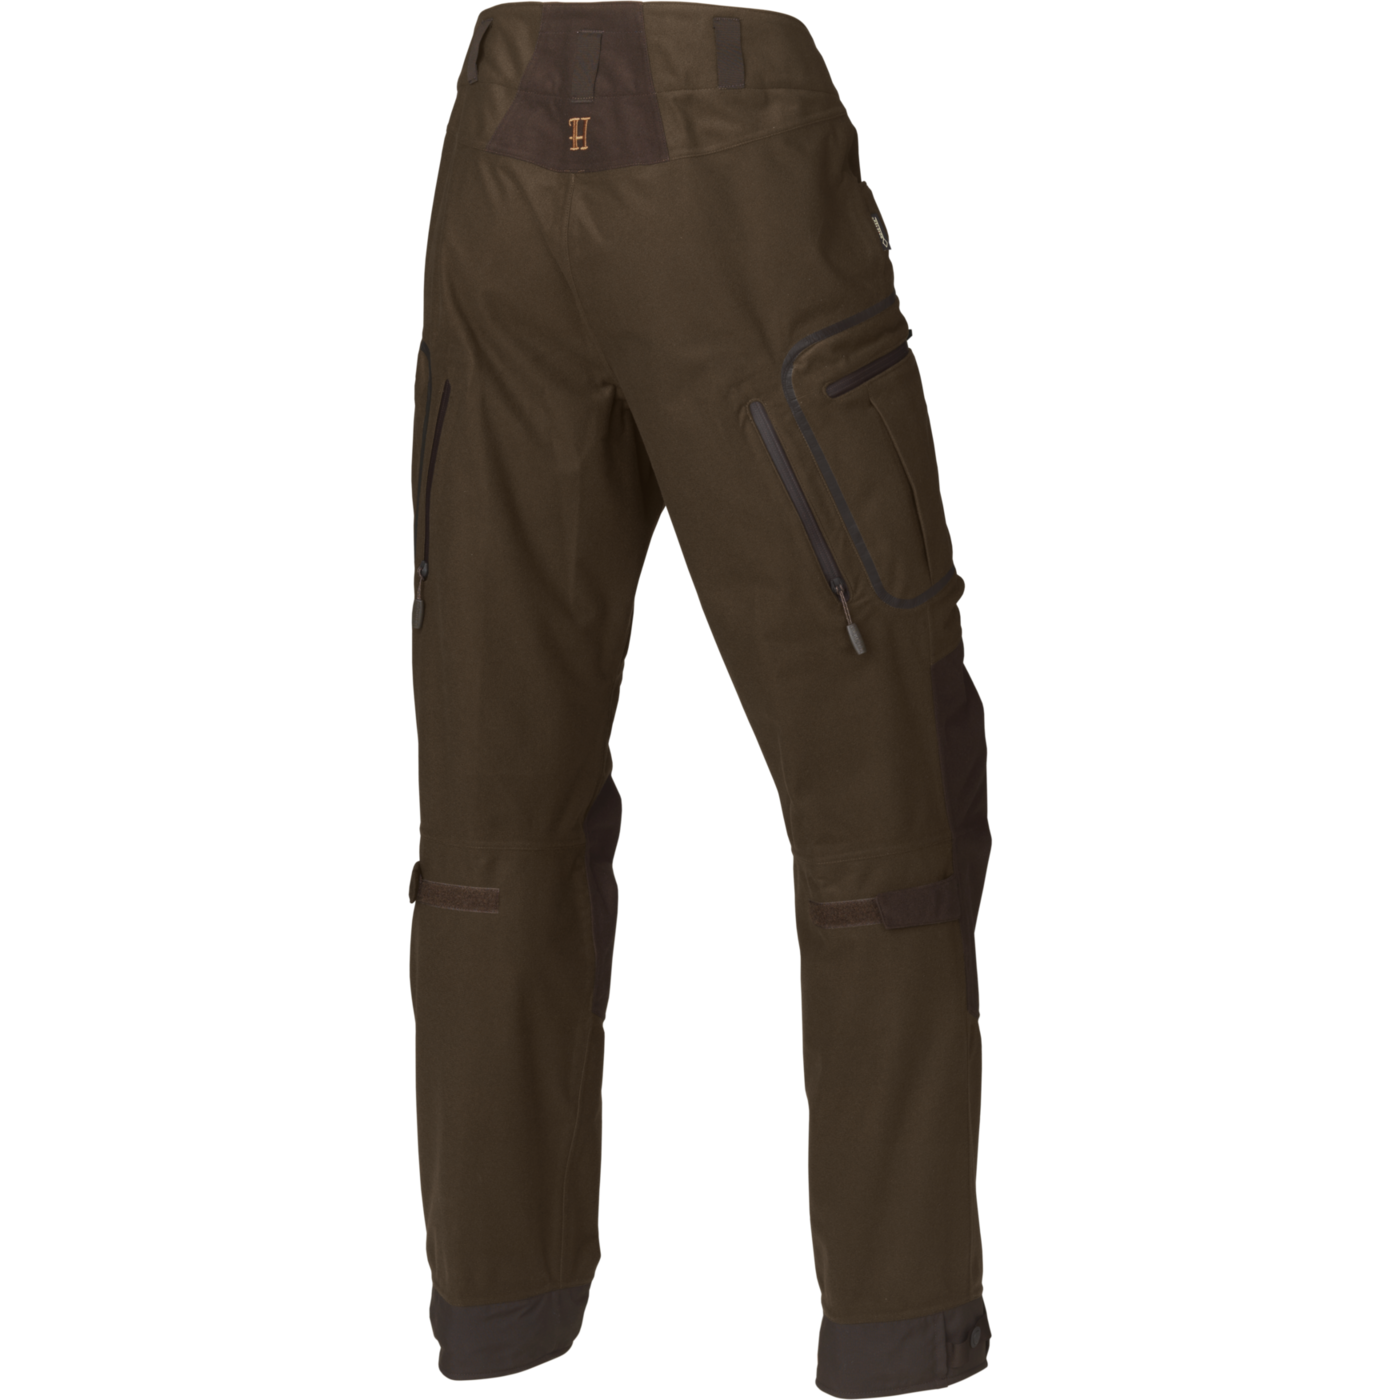 Mountain Hunter trouser by Härkila | 2-layer GORE-TEX hunting pants